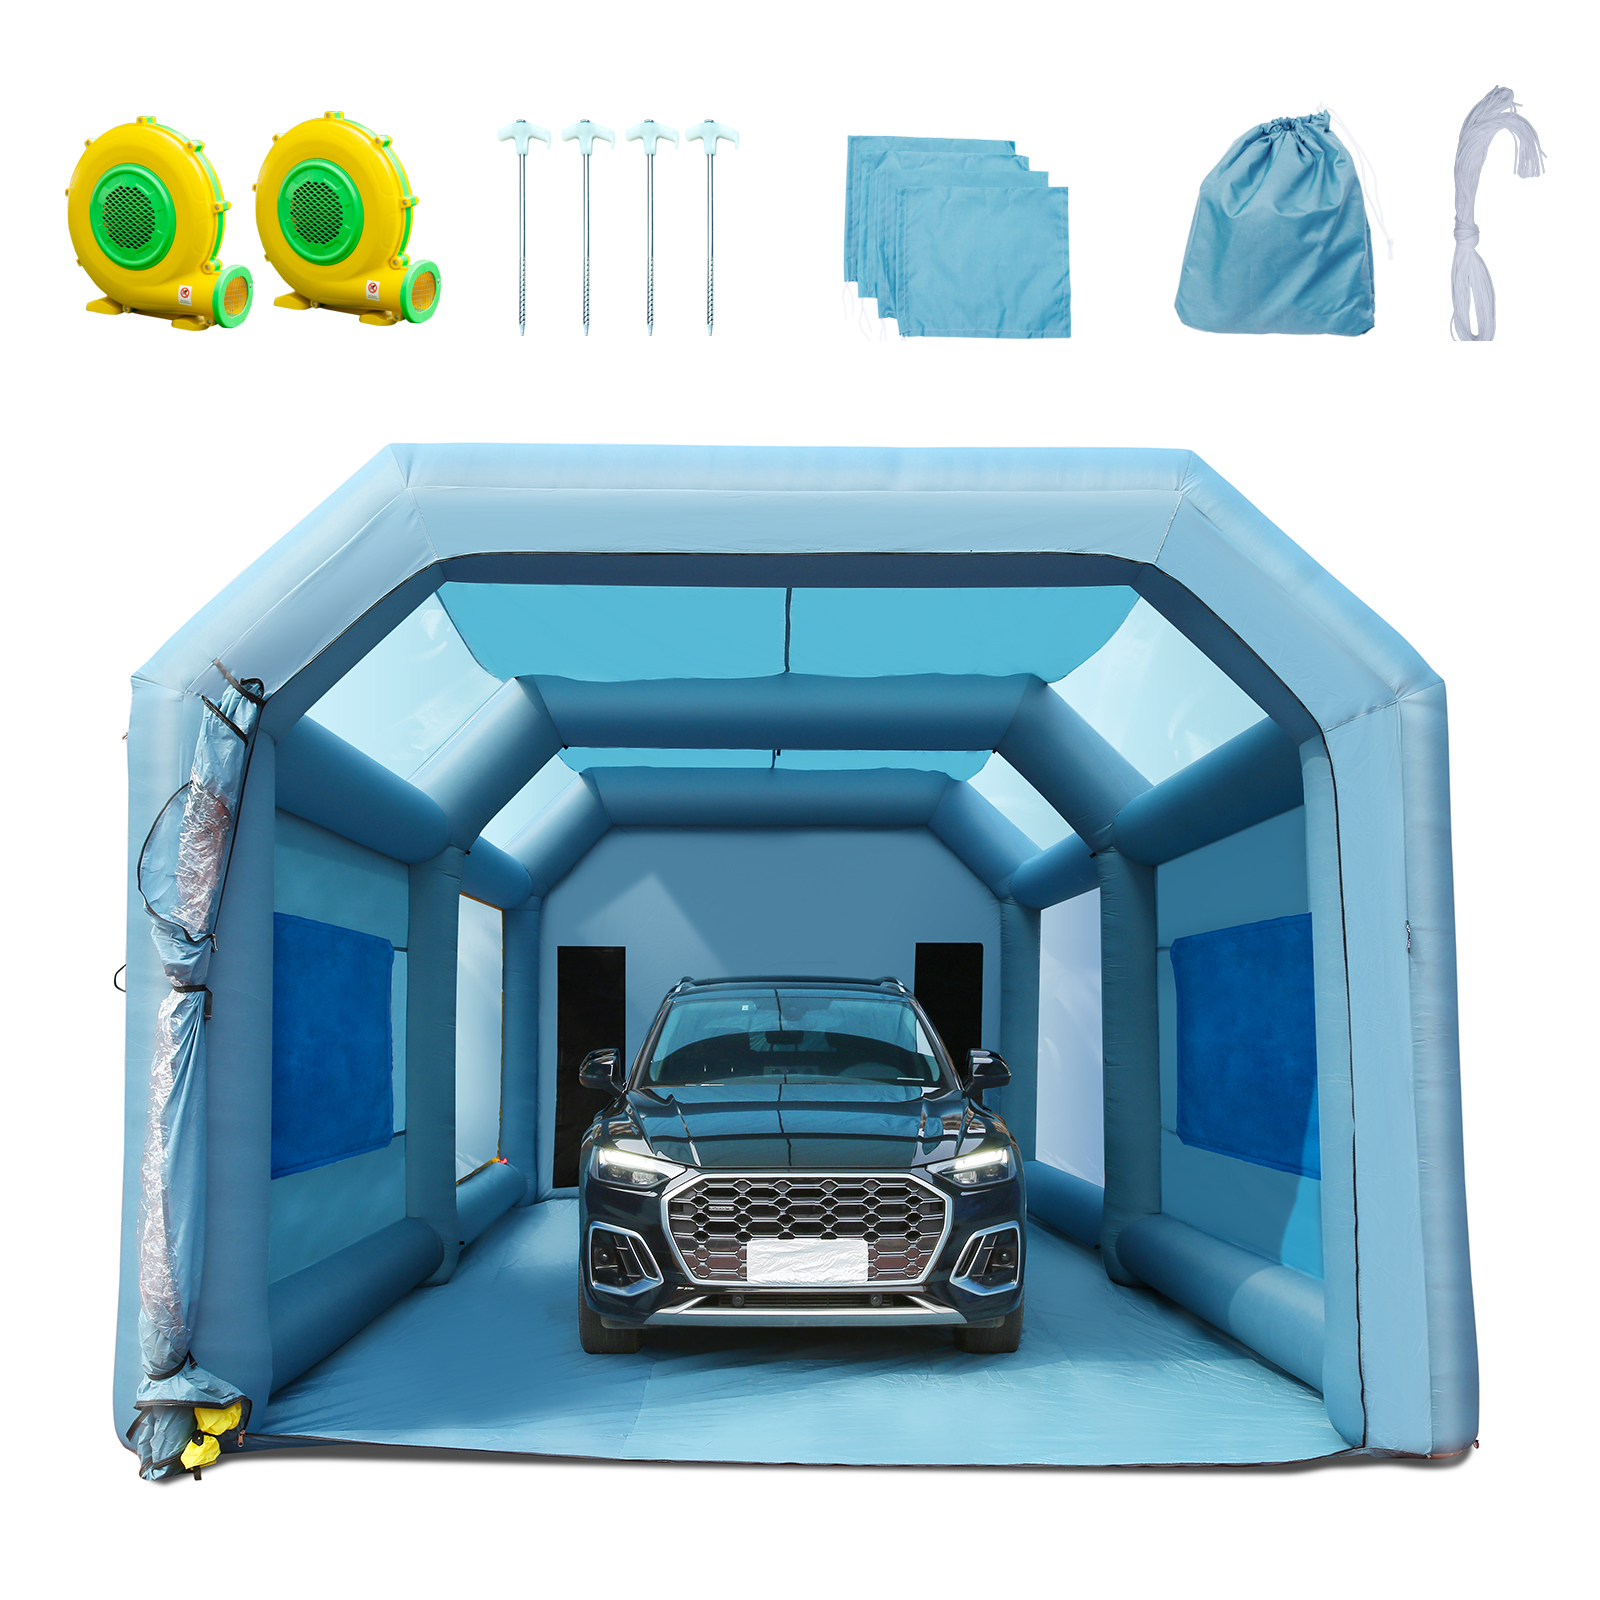 Happybuy Portable Inflatable Paint Booth, 13x8x8ft Inflatable Spray Booth, Car Paint Tent Air Filter System & 2 Blowers, Upgraded Blow Up Spray